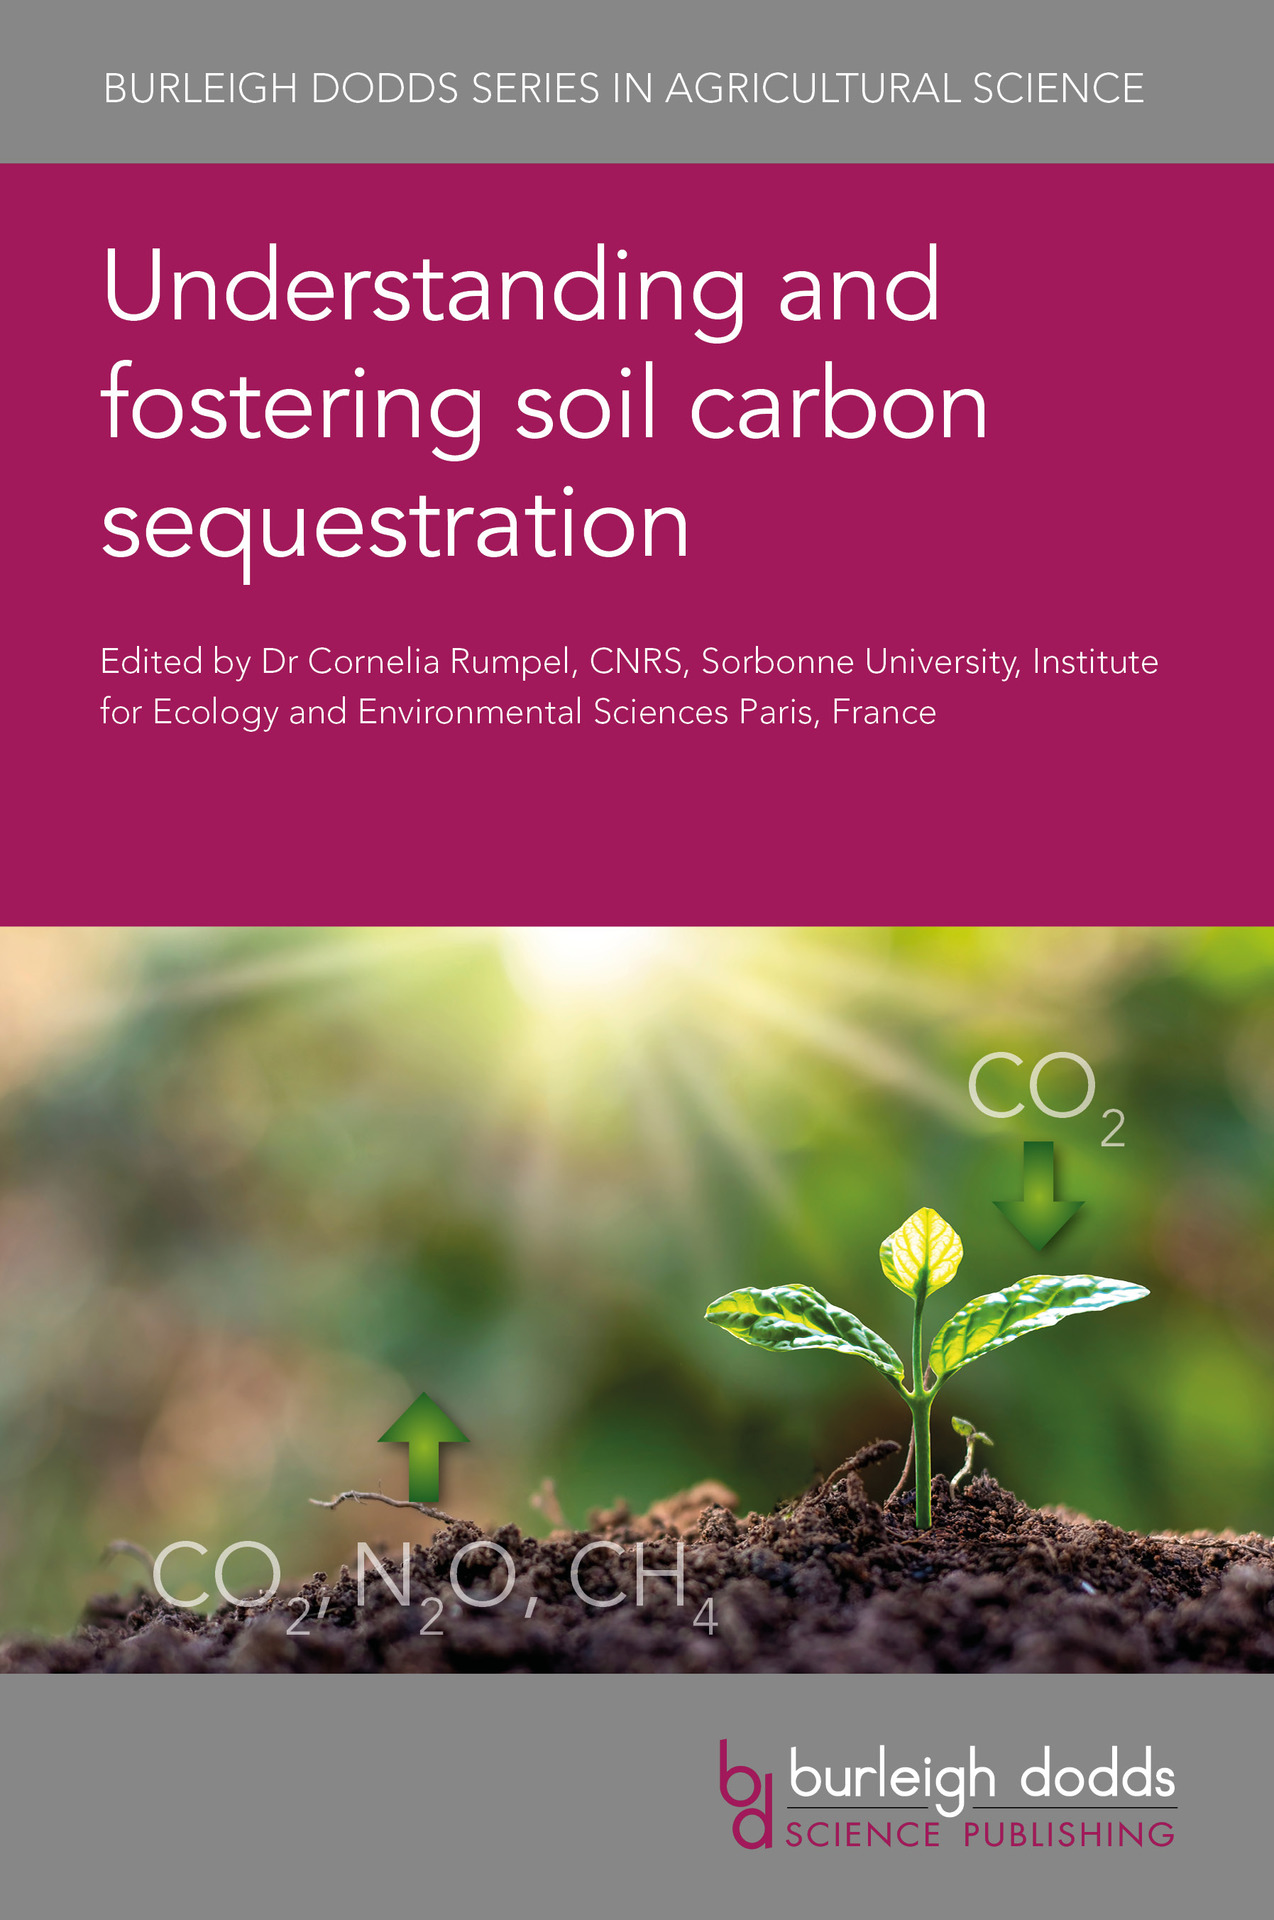 Understanding and fostering soil carbon sequestration